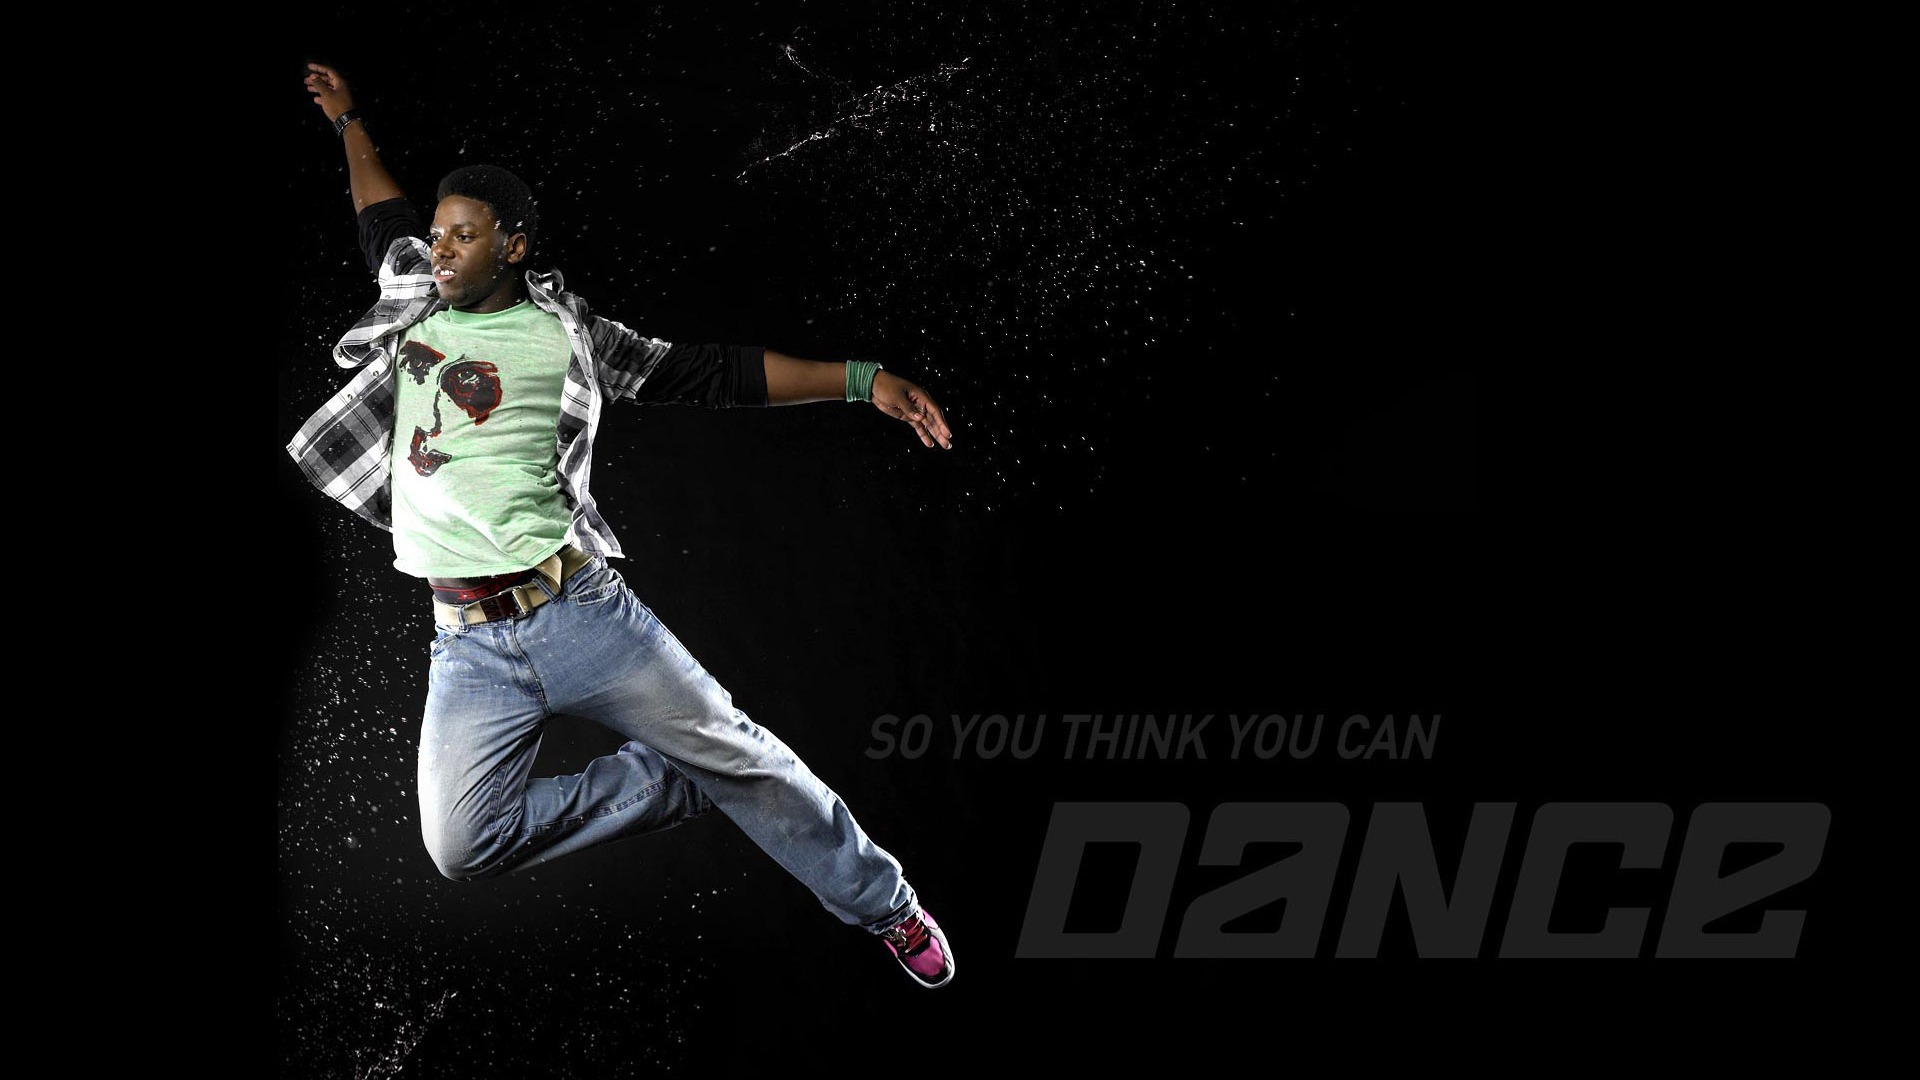 So You Think You Can Dance wallpaper (1) #18 - 1920x1080